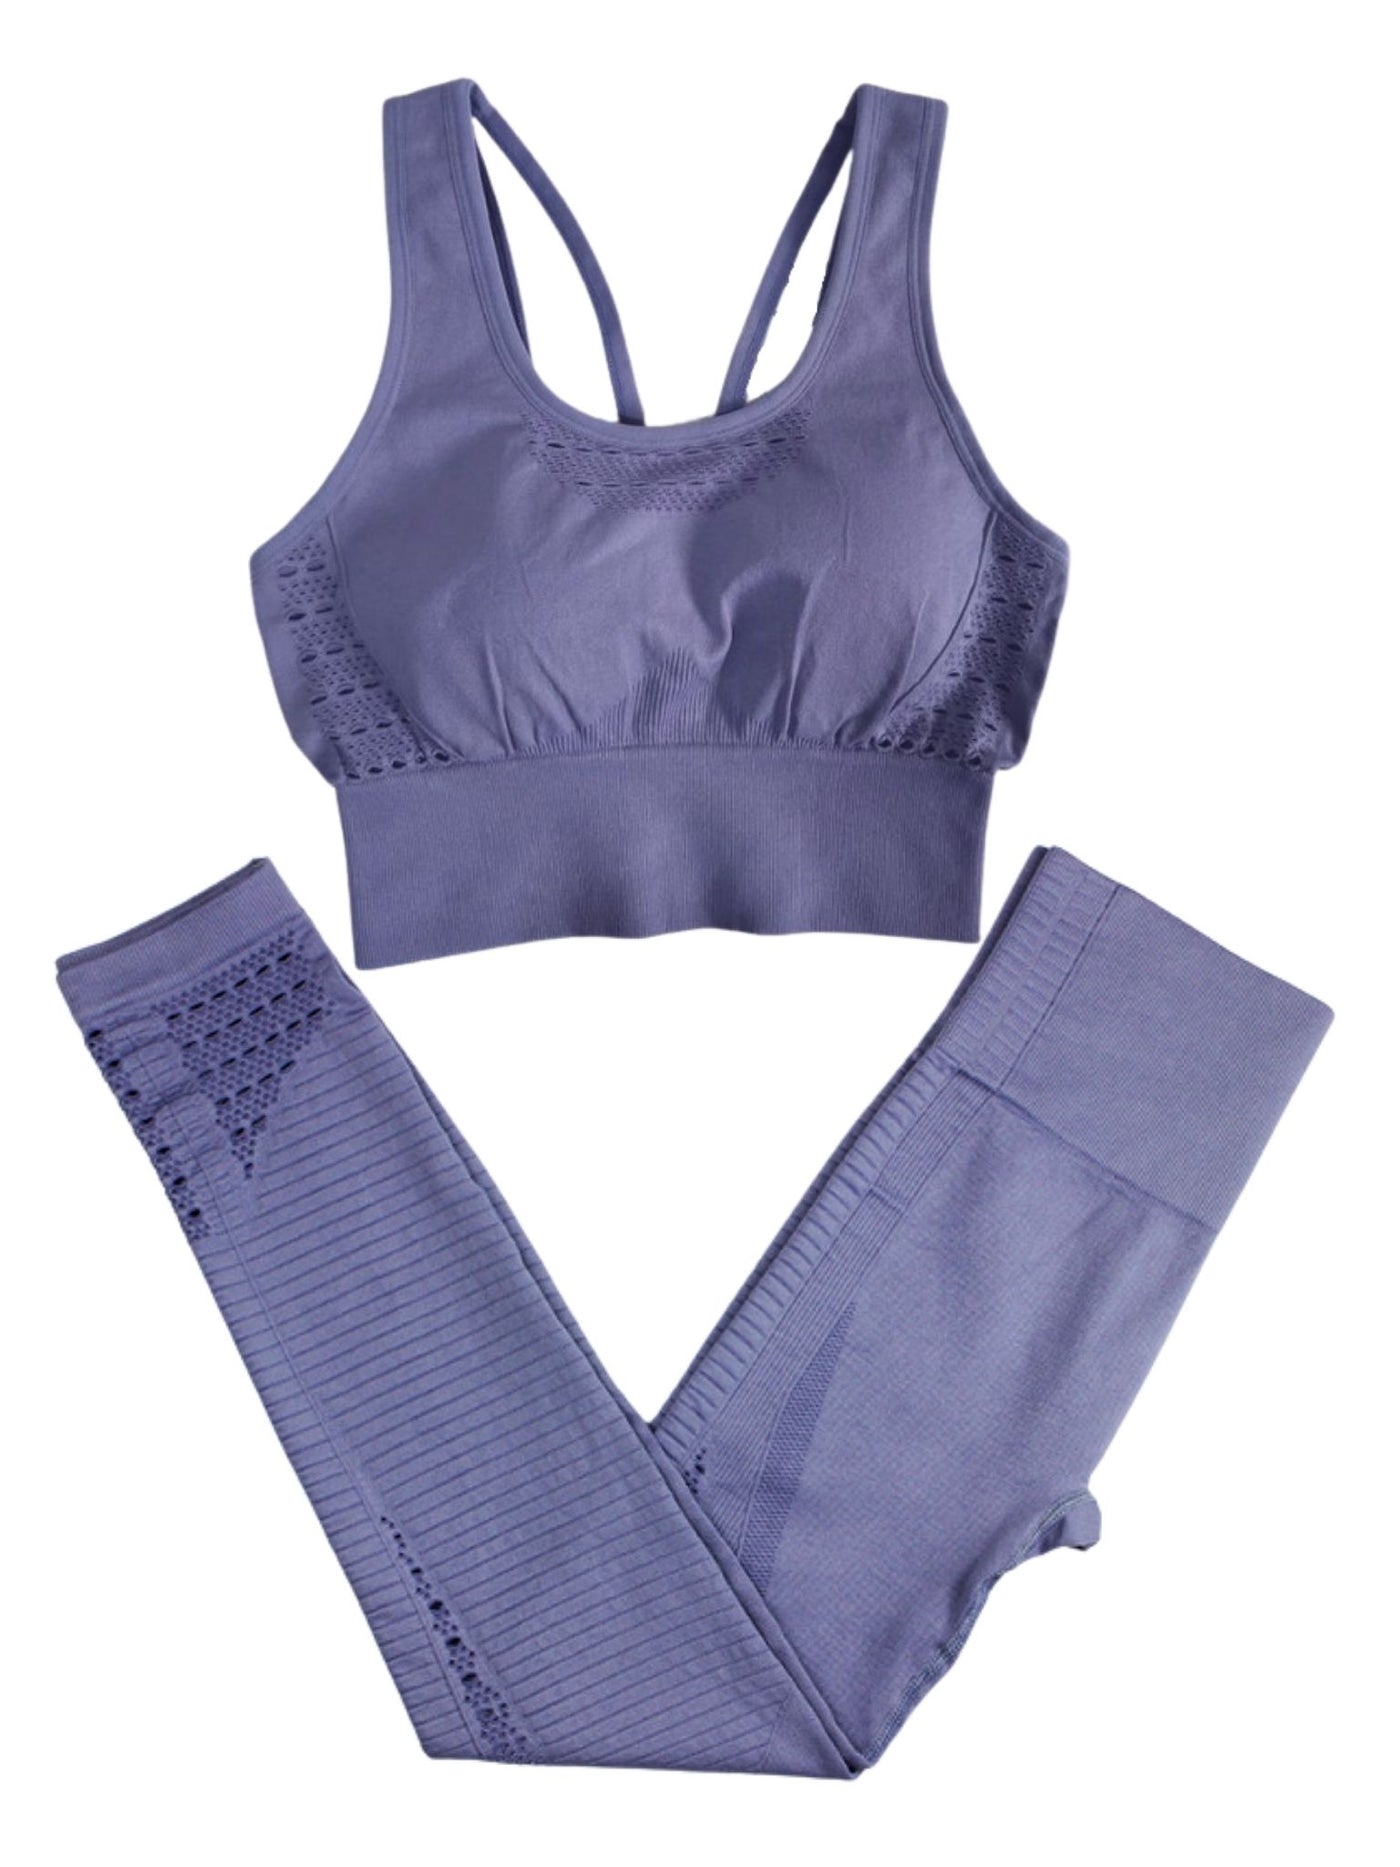 Affordable Bra and Legging Sets by Bellaria – BellariaOnline